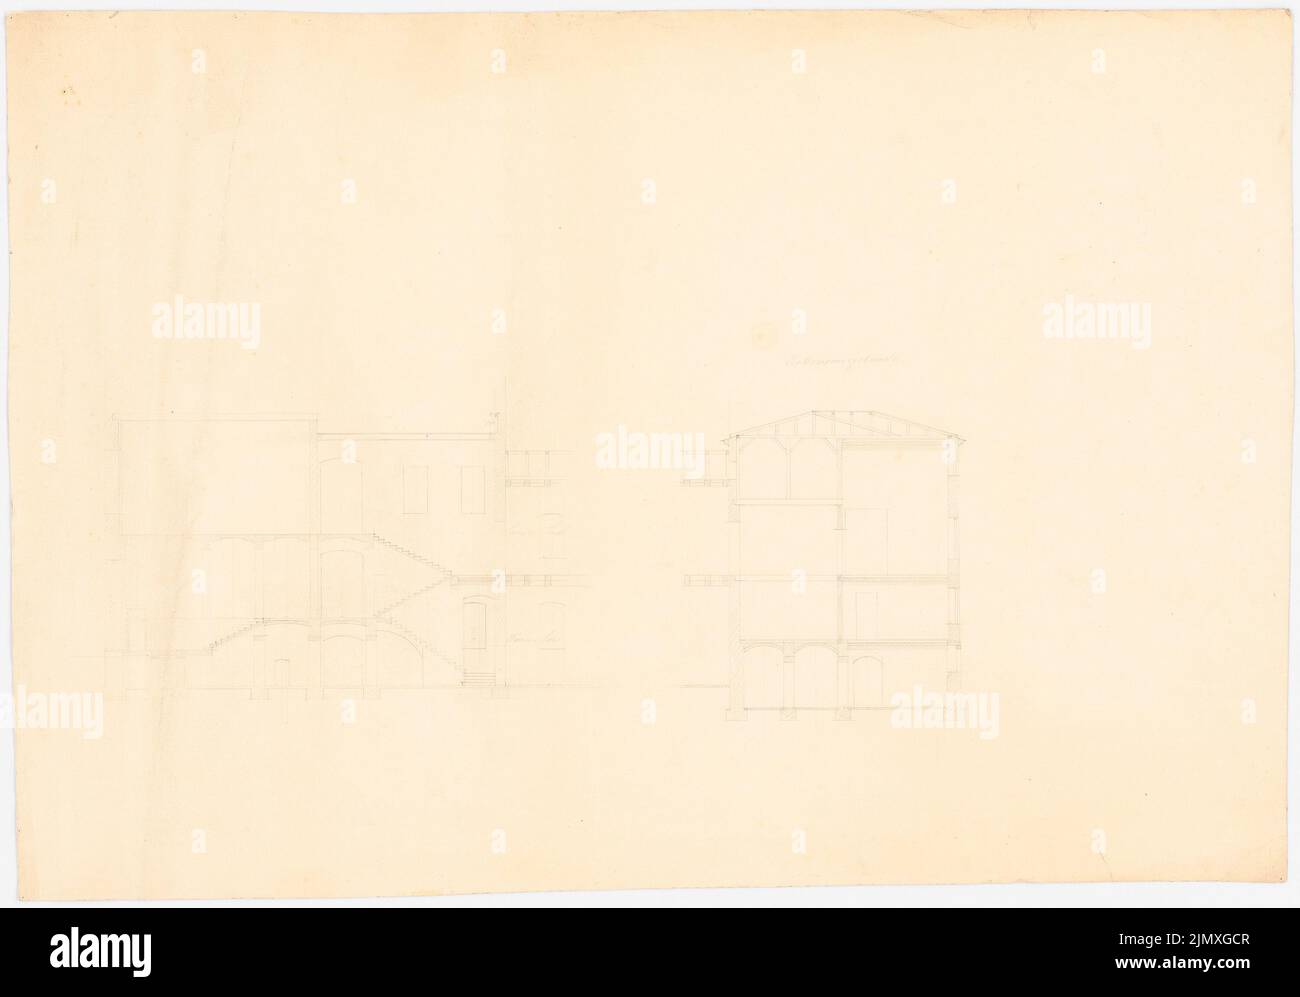 Unknown architect, barracks (?) (approx. 1900): farm building. Longitudinal and cross-section, probably 1: 100. Pencil on cardboard, 55.1 x 79 cm (including scan edges) N.N. : Kaserne (?) Stock Photo